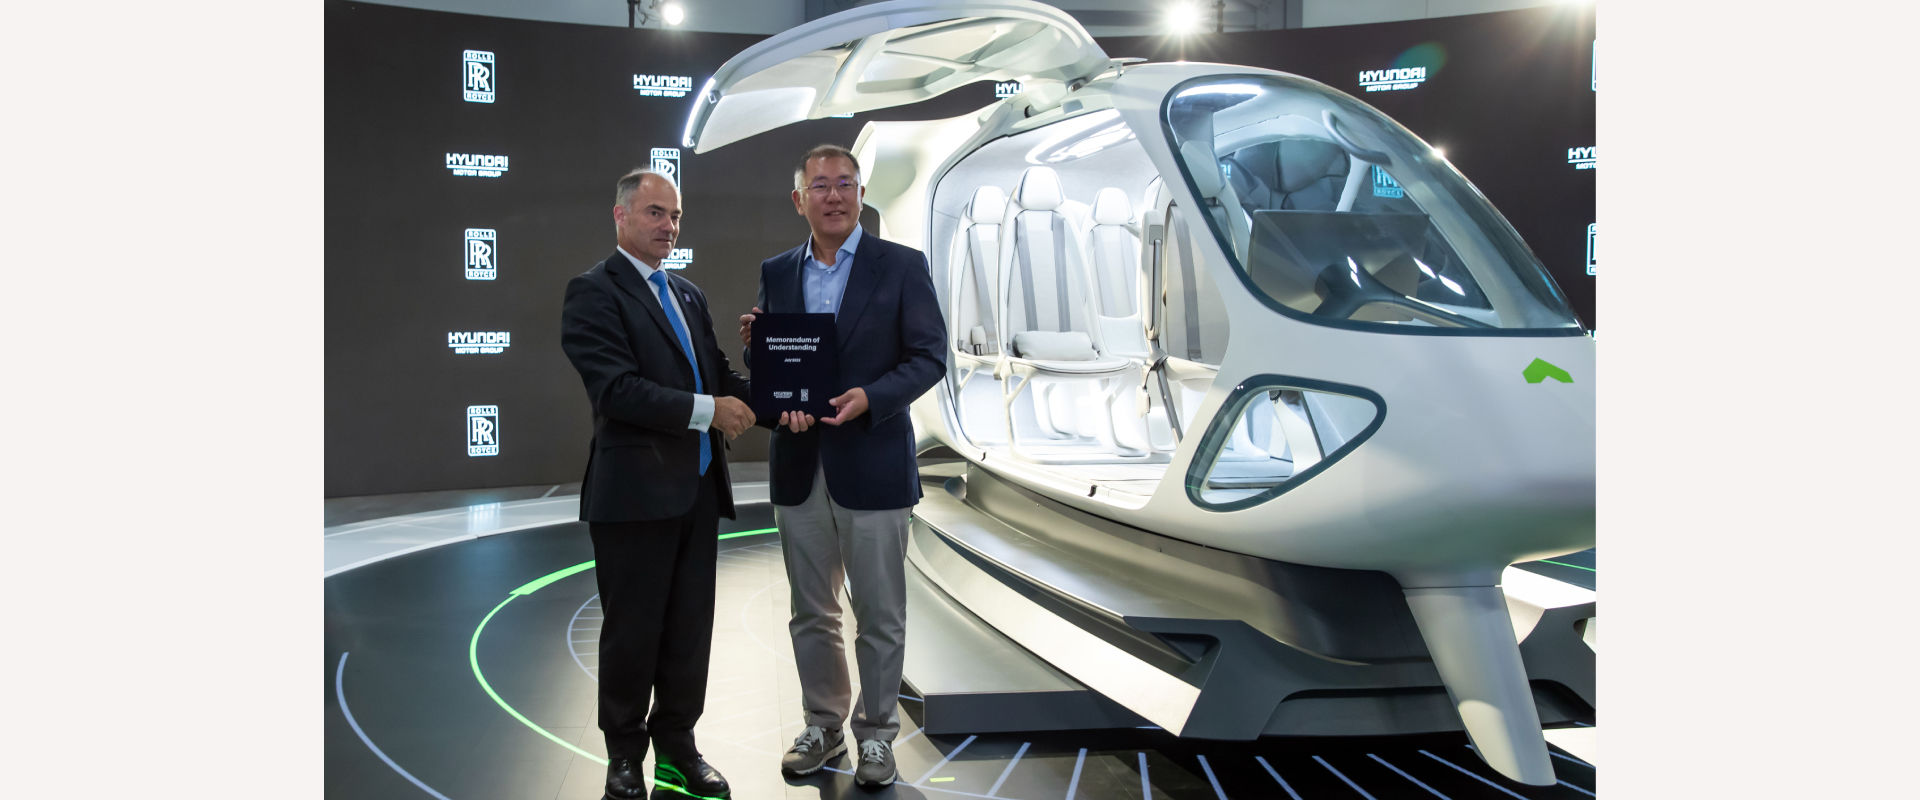 ROLLS-ROYCE & HYUNDAI MOTOR GROUP SIGN MOU TO LEAD THE WAY IN  THE ADVANCED AIR MOBILITY MARKET USING ALL-ELECTRIC PROPULSION AND HYDROGEN FUEL CELL TECHNOLOGY